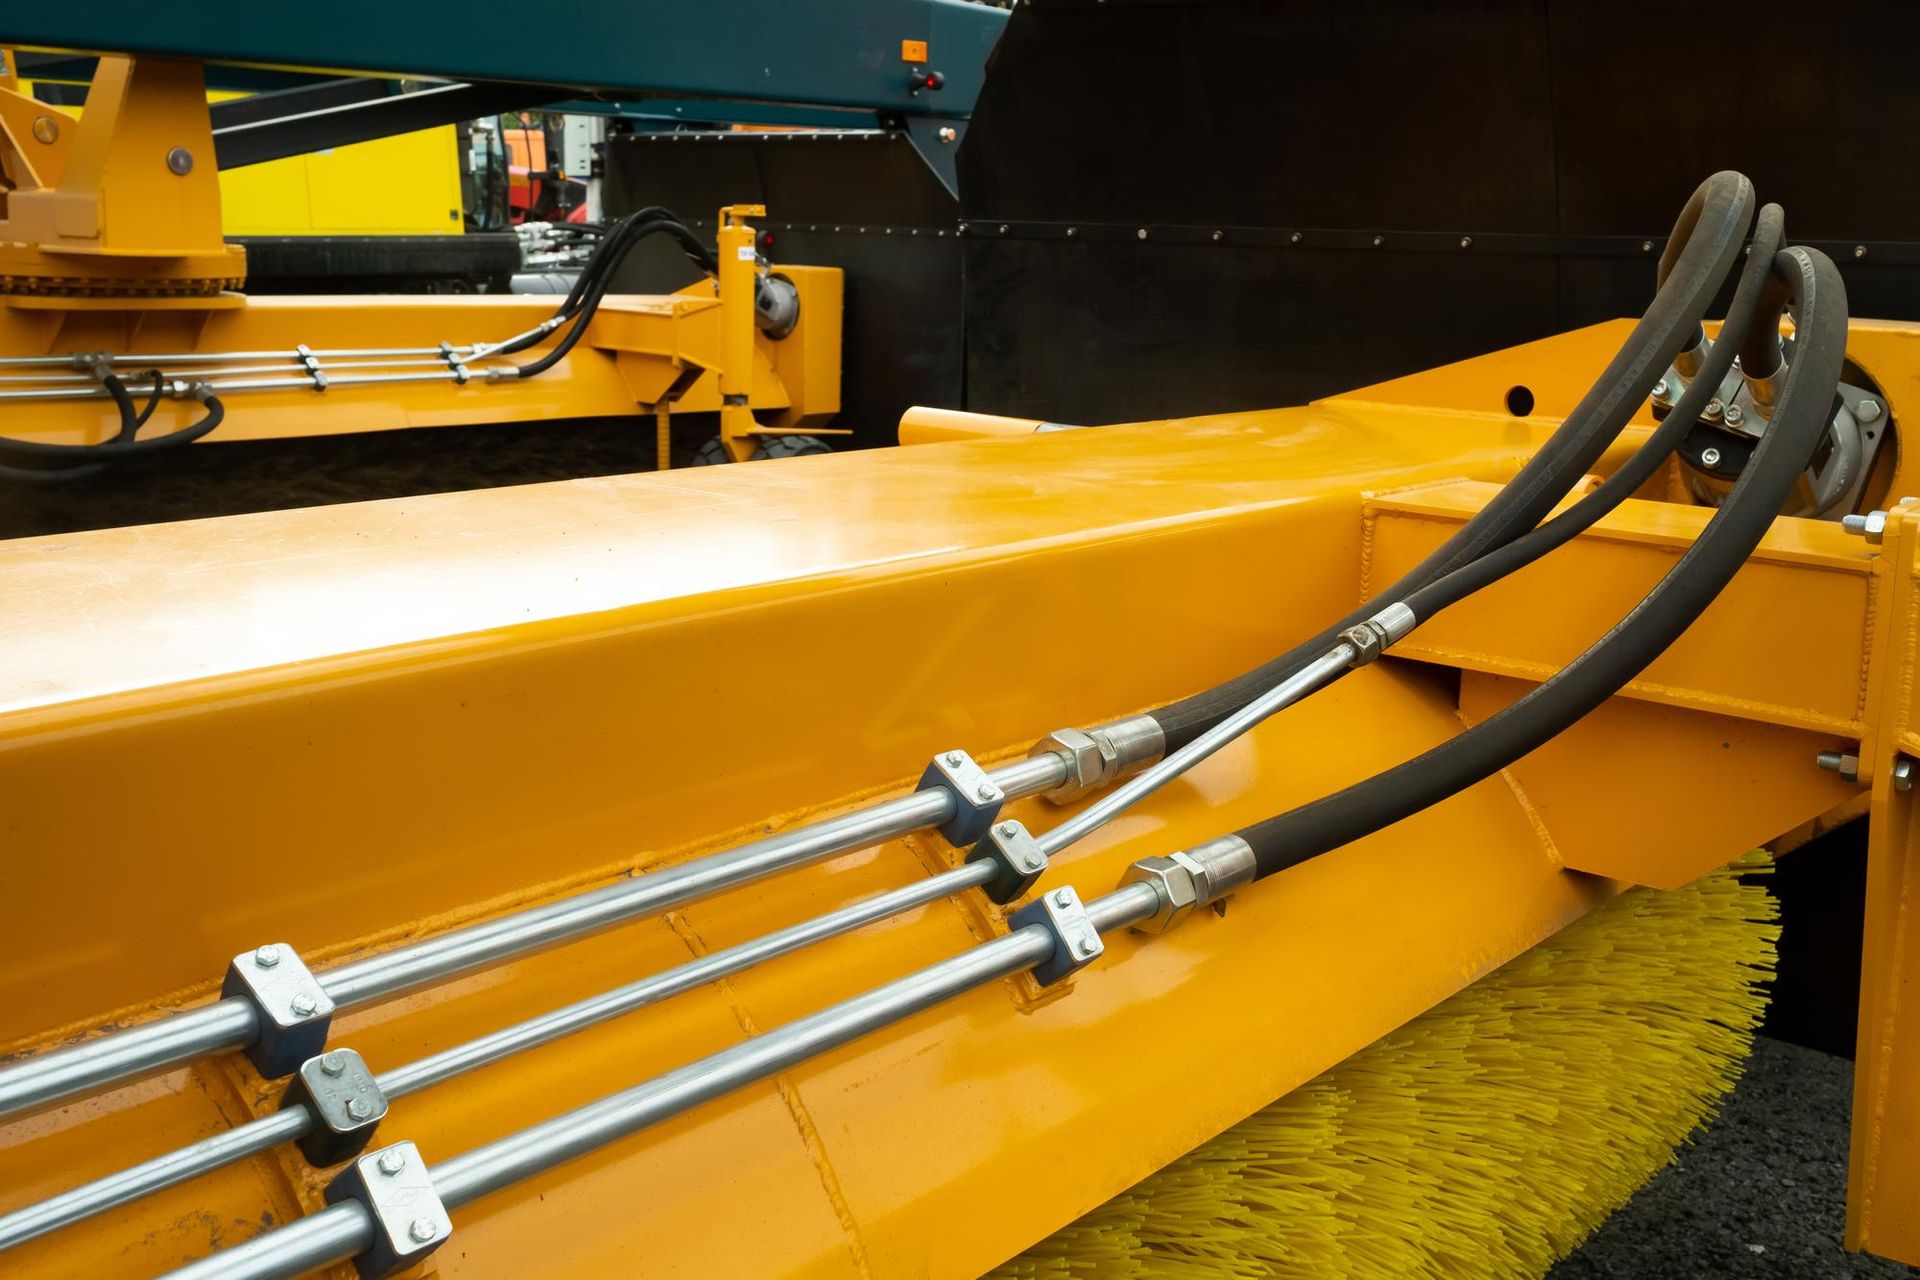 A close up of a yellow broom with hydraulic hoses attached to it